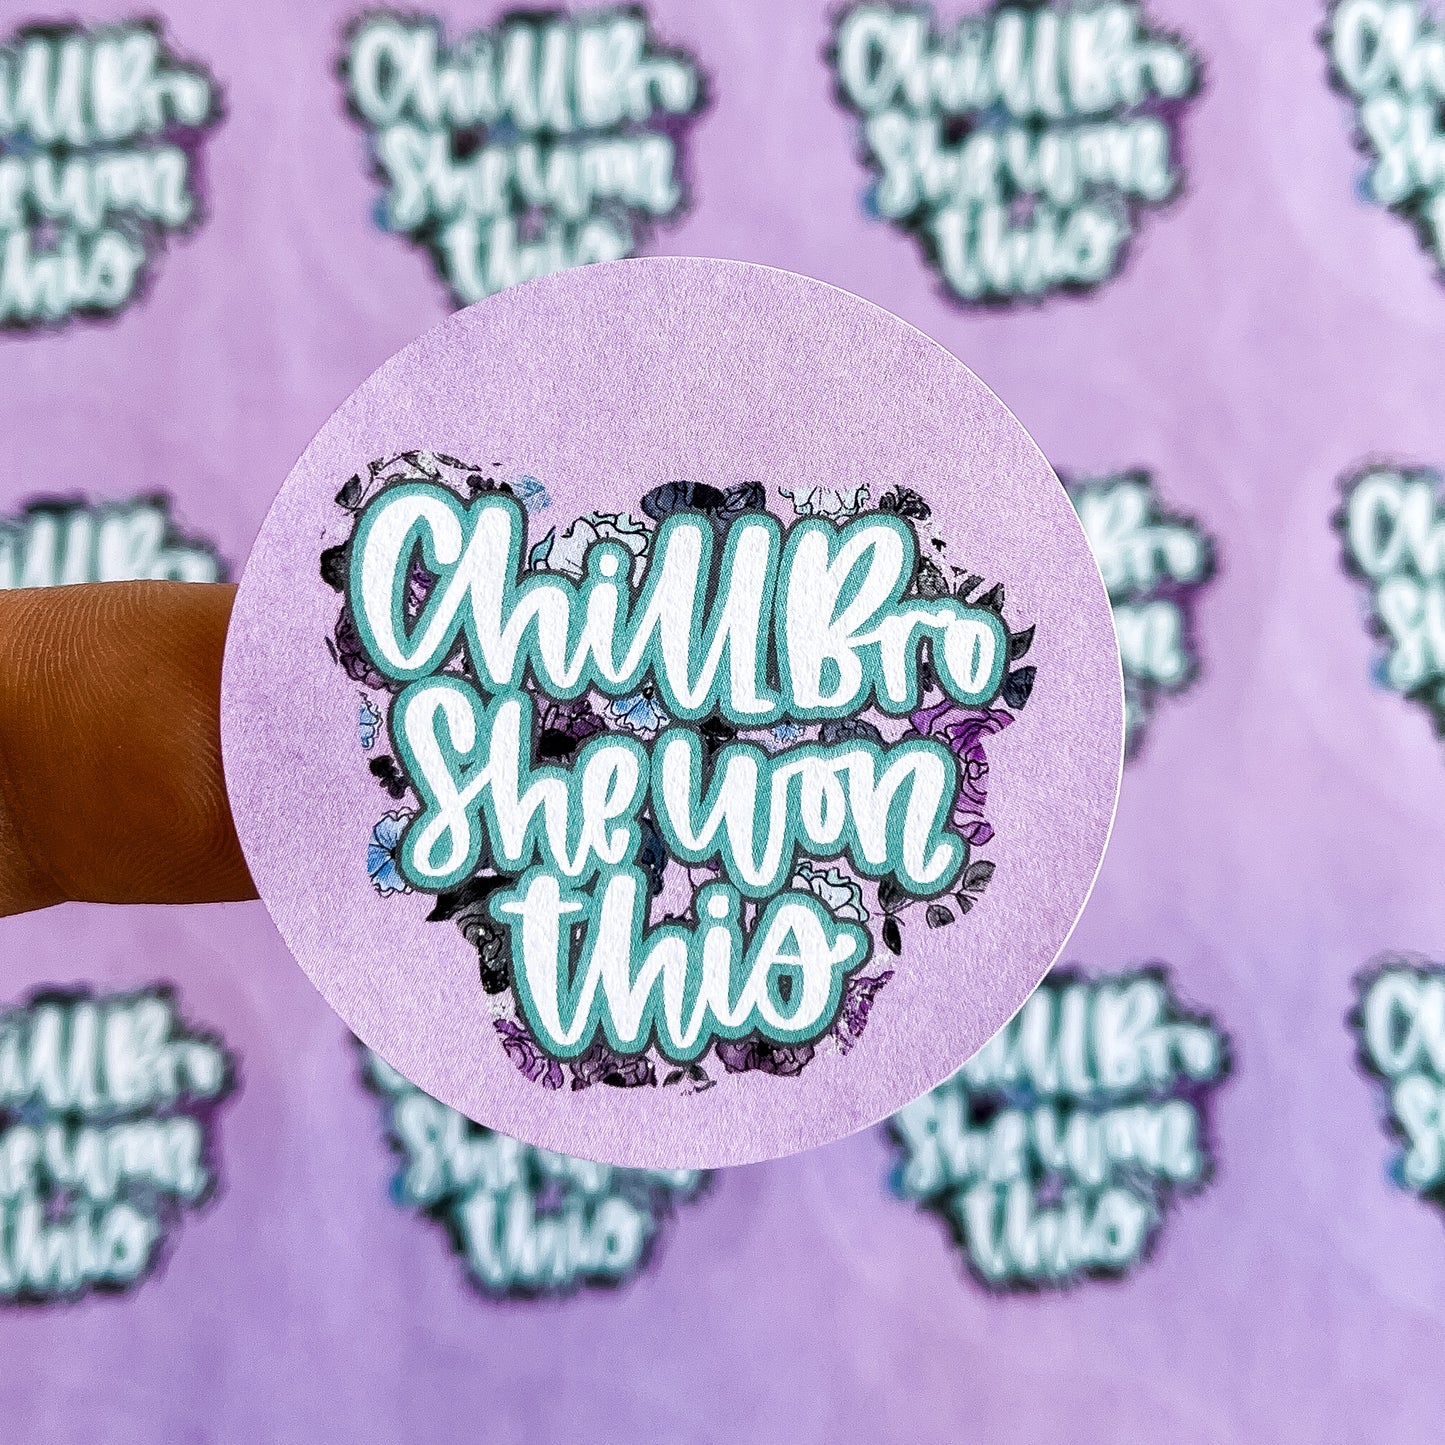 Packaging Stickers | #RTS0188 - CHILL BRO SHE WON THIS